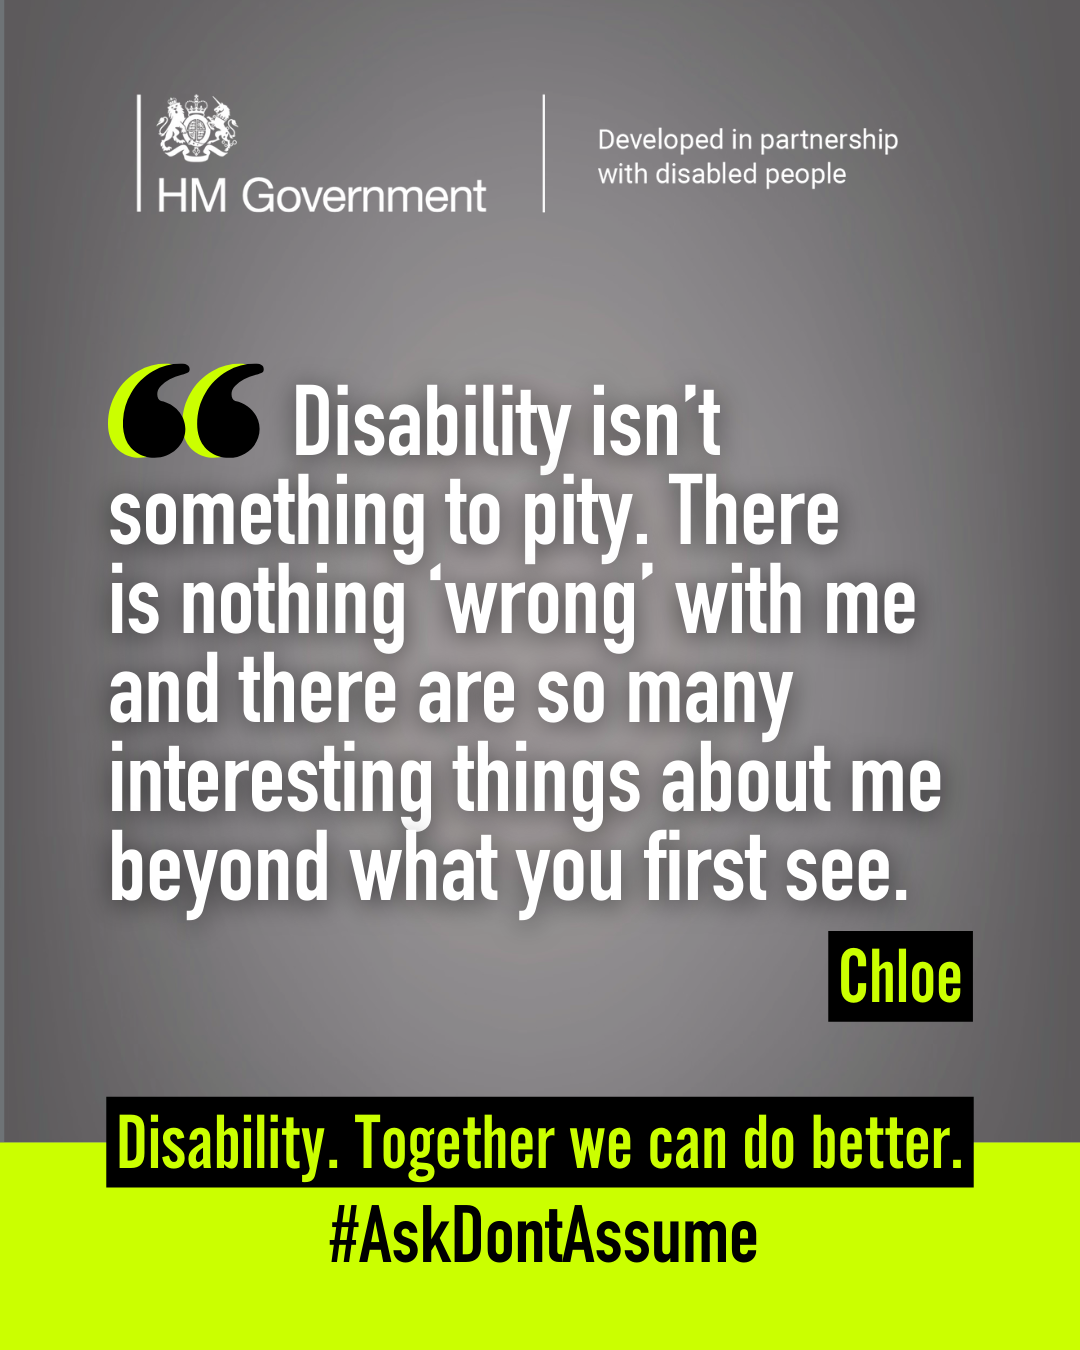 Dark grey portrait graphic with the HM Government logo and “Developed in partnership with disabled people” at the top. A quote from Chloe reads: “Disability isn’t something to pity. There is nothing 'wrong' with me and there are so many interesting things about me beyond what you first see”. At the bottom of the graphic it reads: “Disability. Together we can do better. #AskDontAssume”